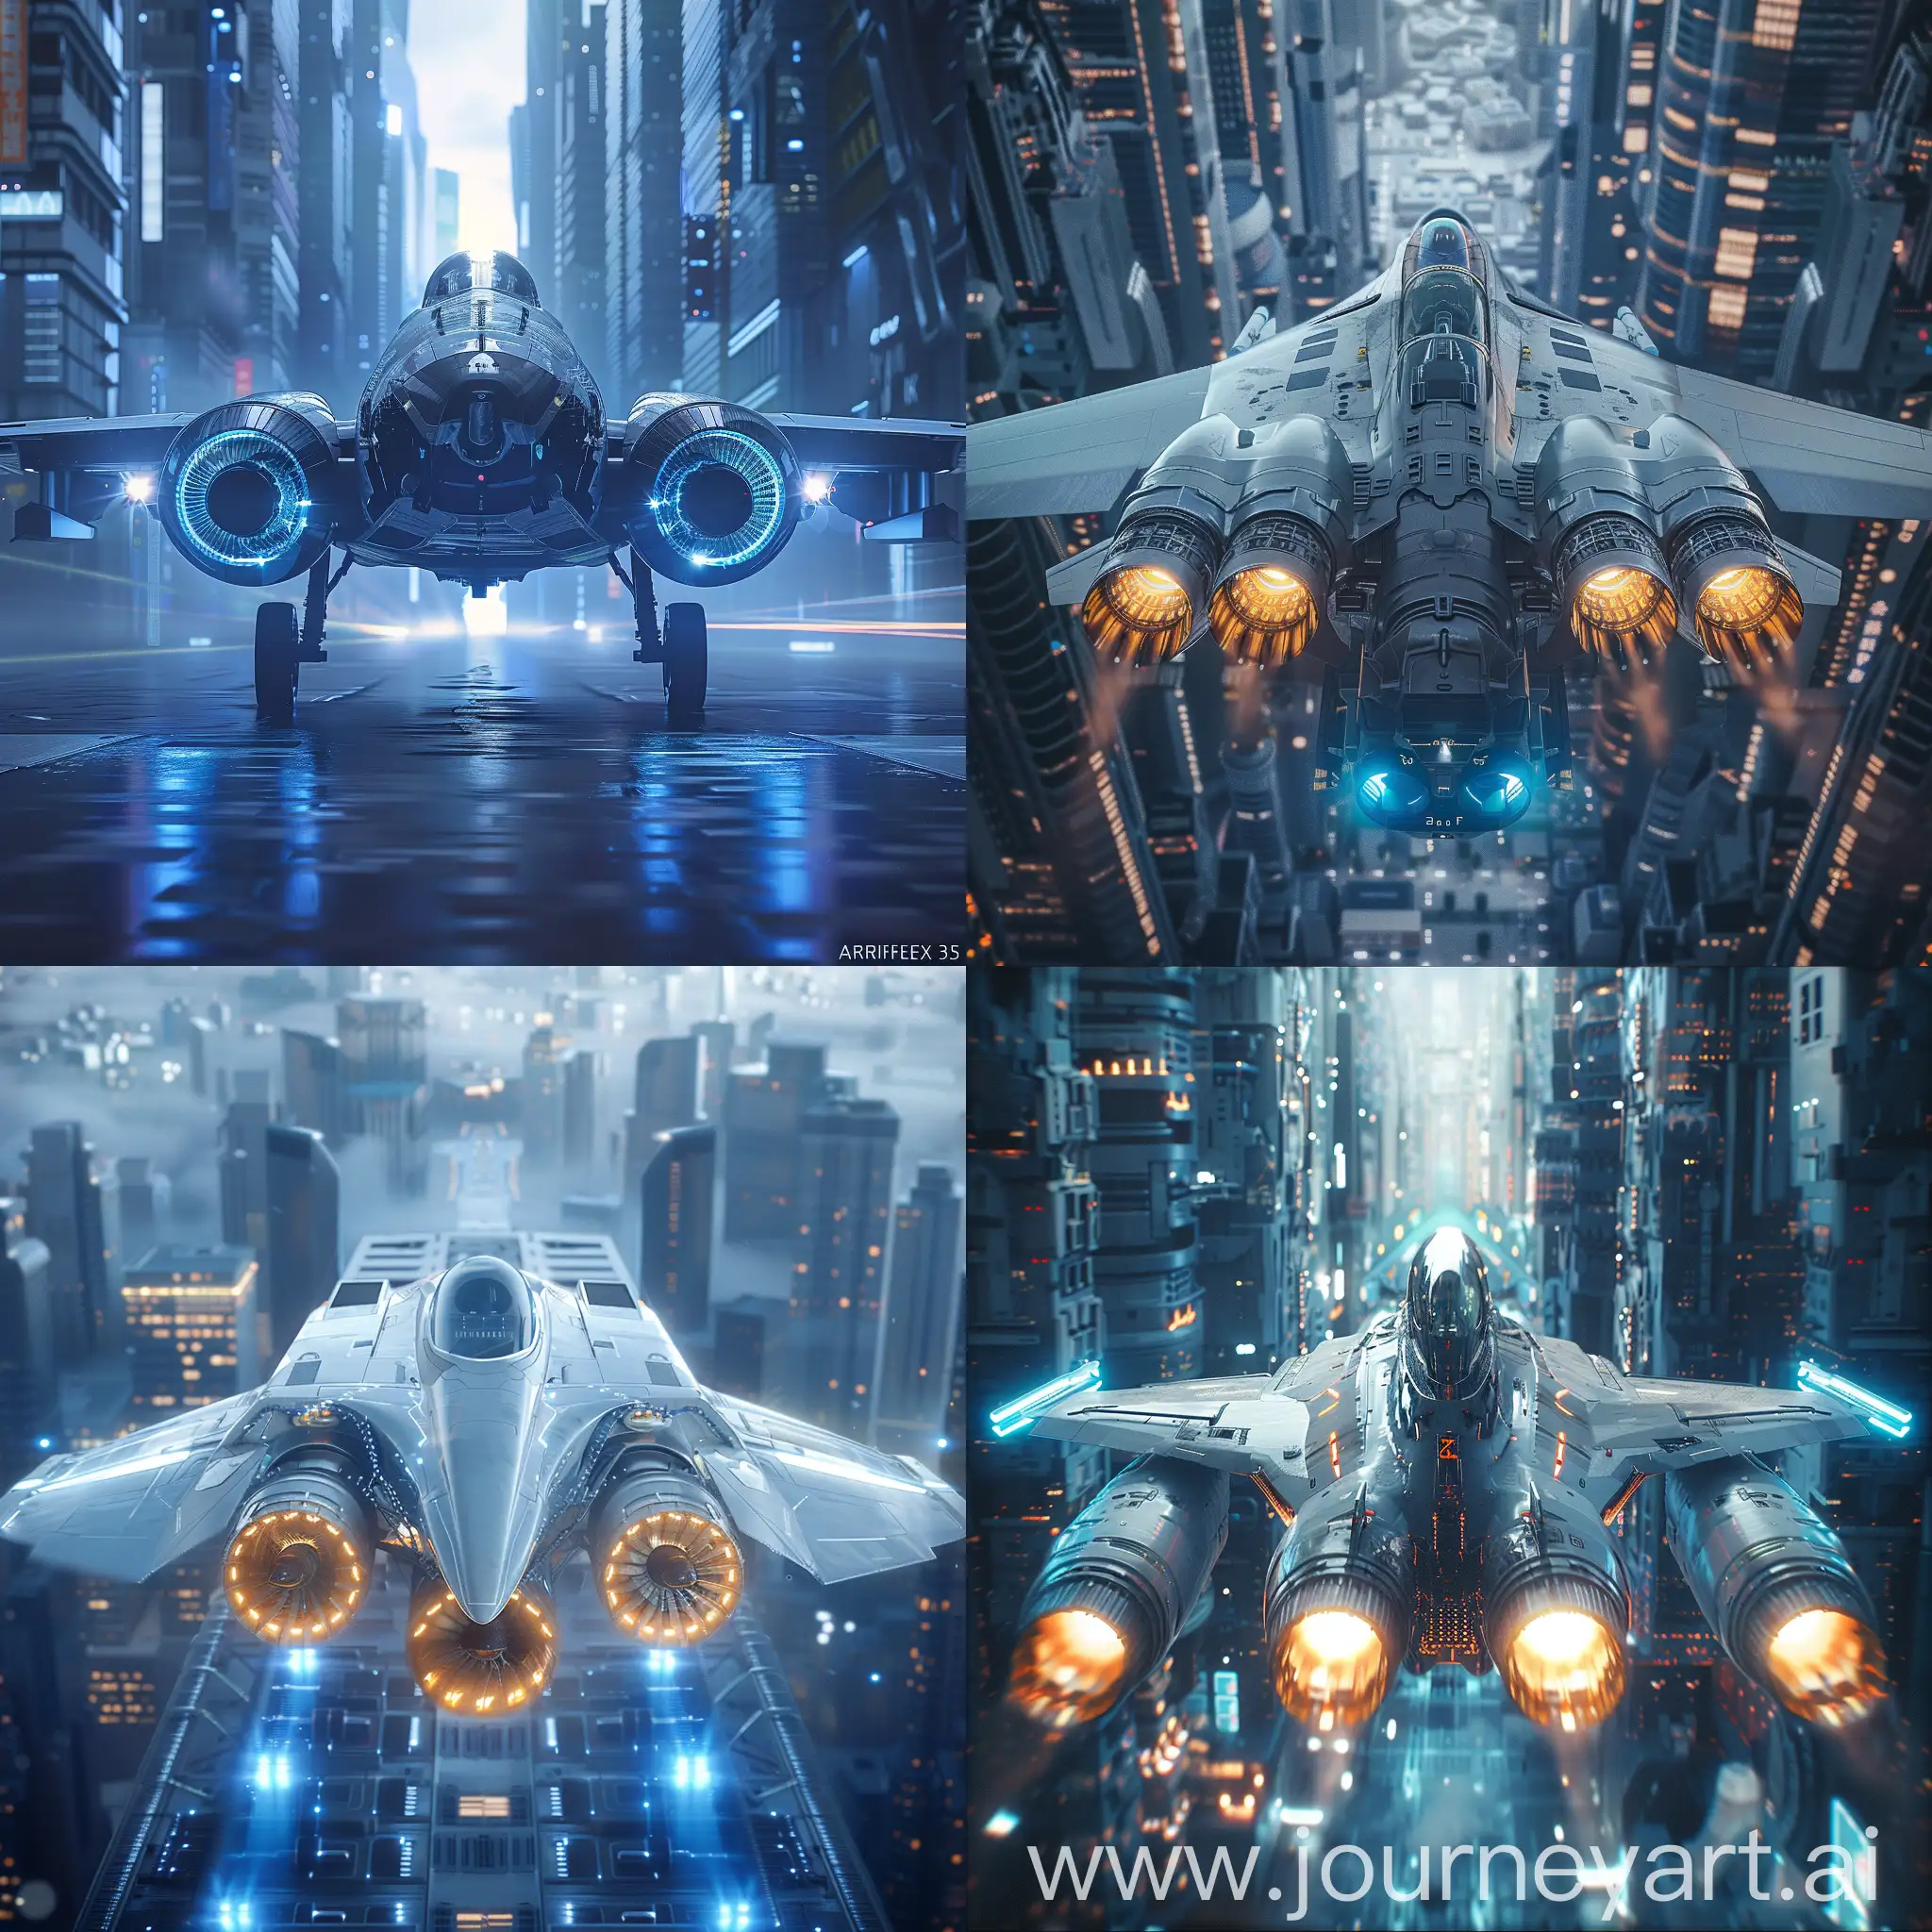 Futuristic-Fighter-Jet-Glowing-Engines-and-Sleek-Design-in-Urban-Setting